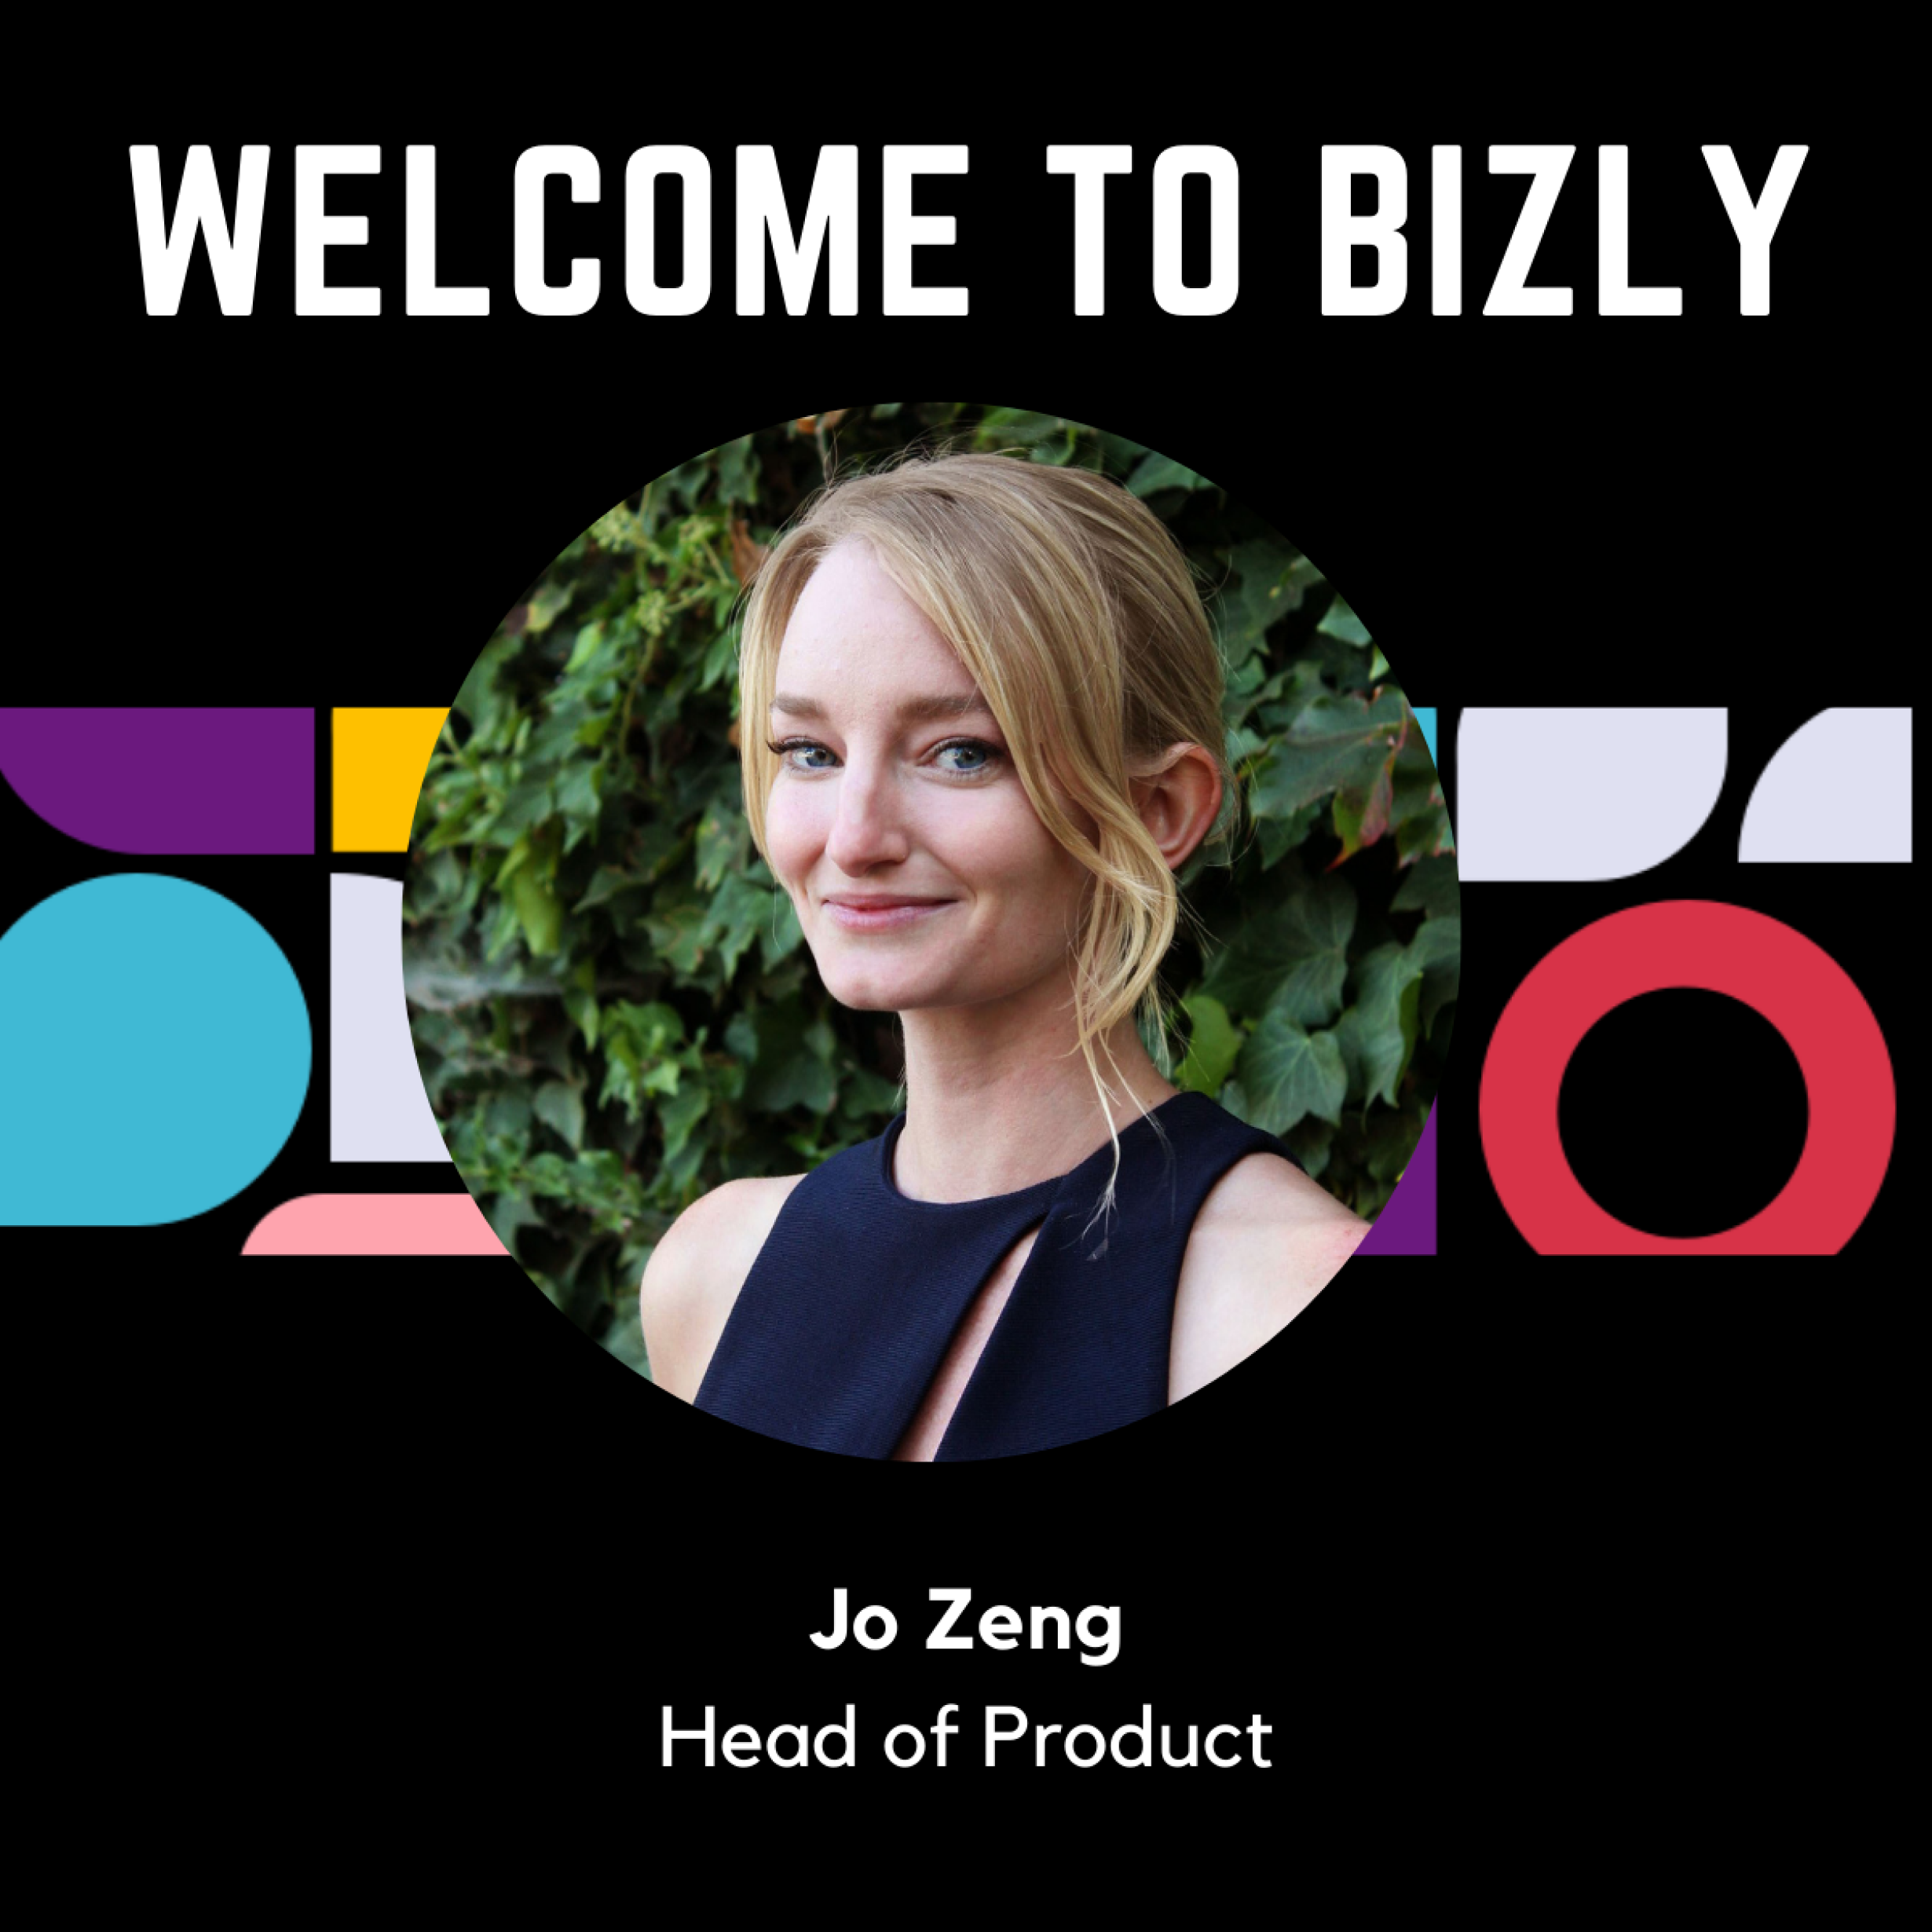 Jo Zeng wellcome to bizly image